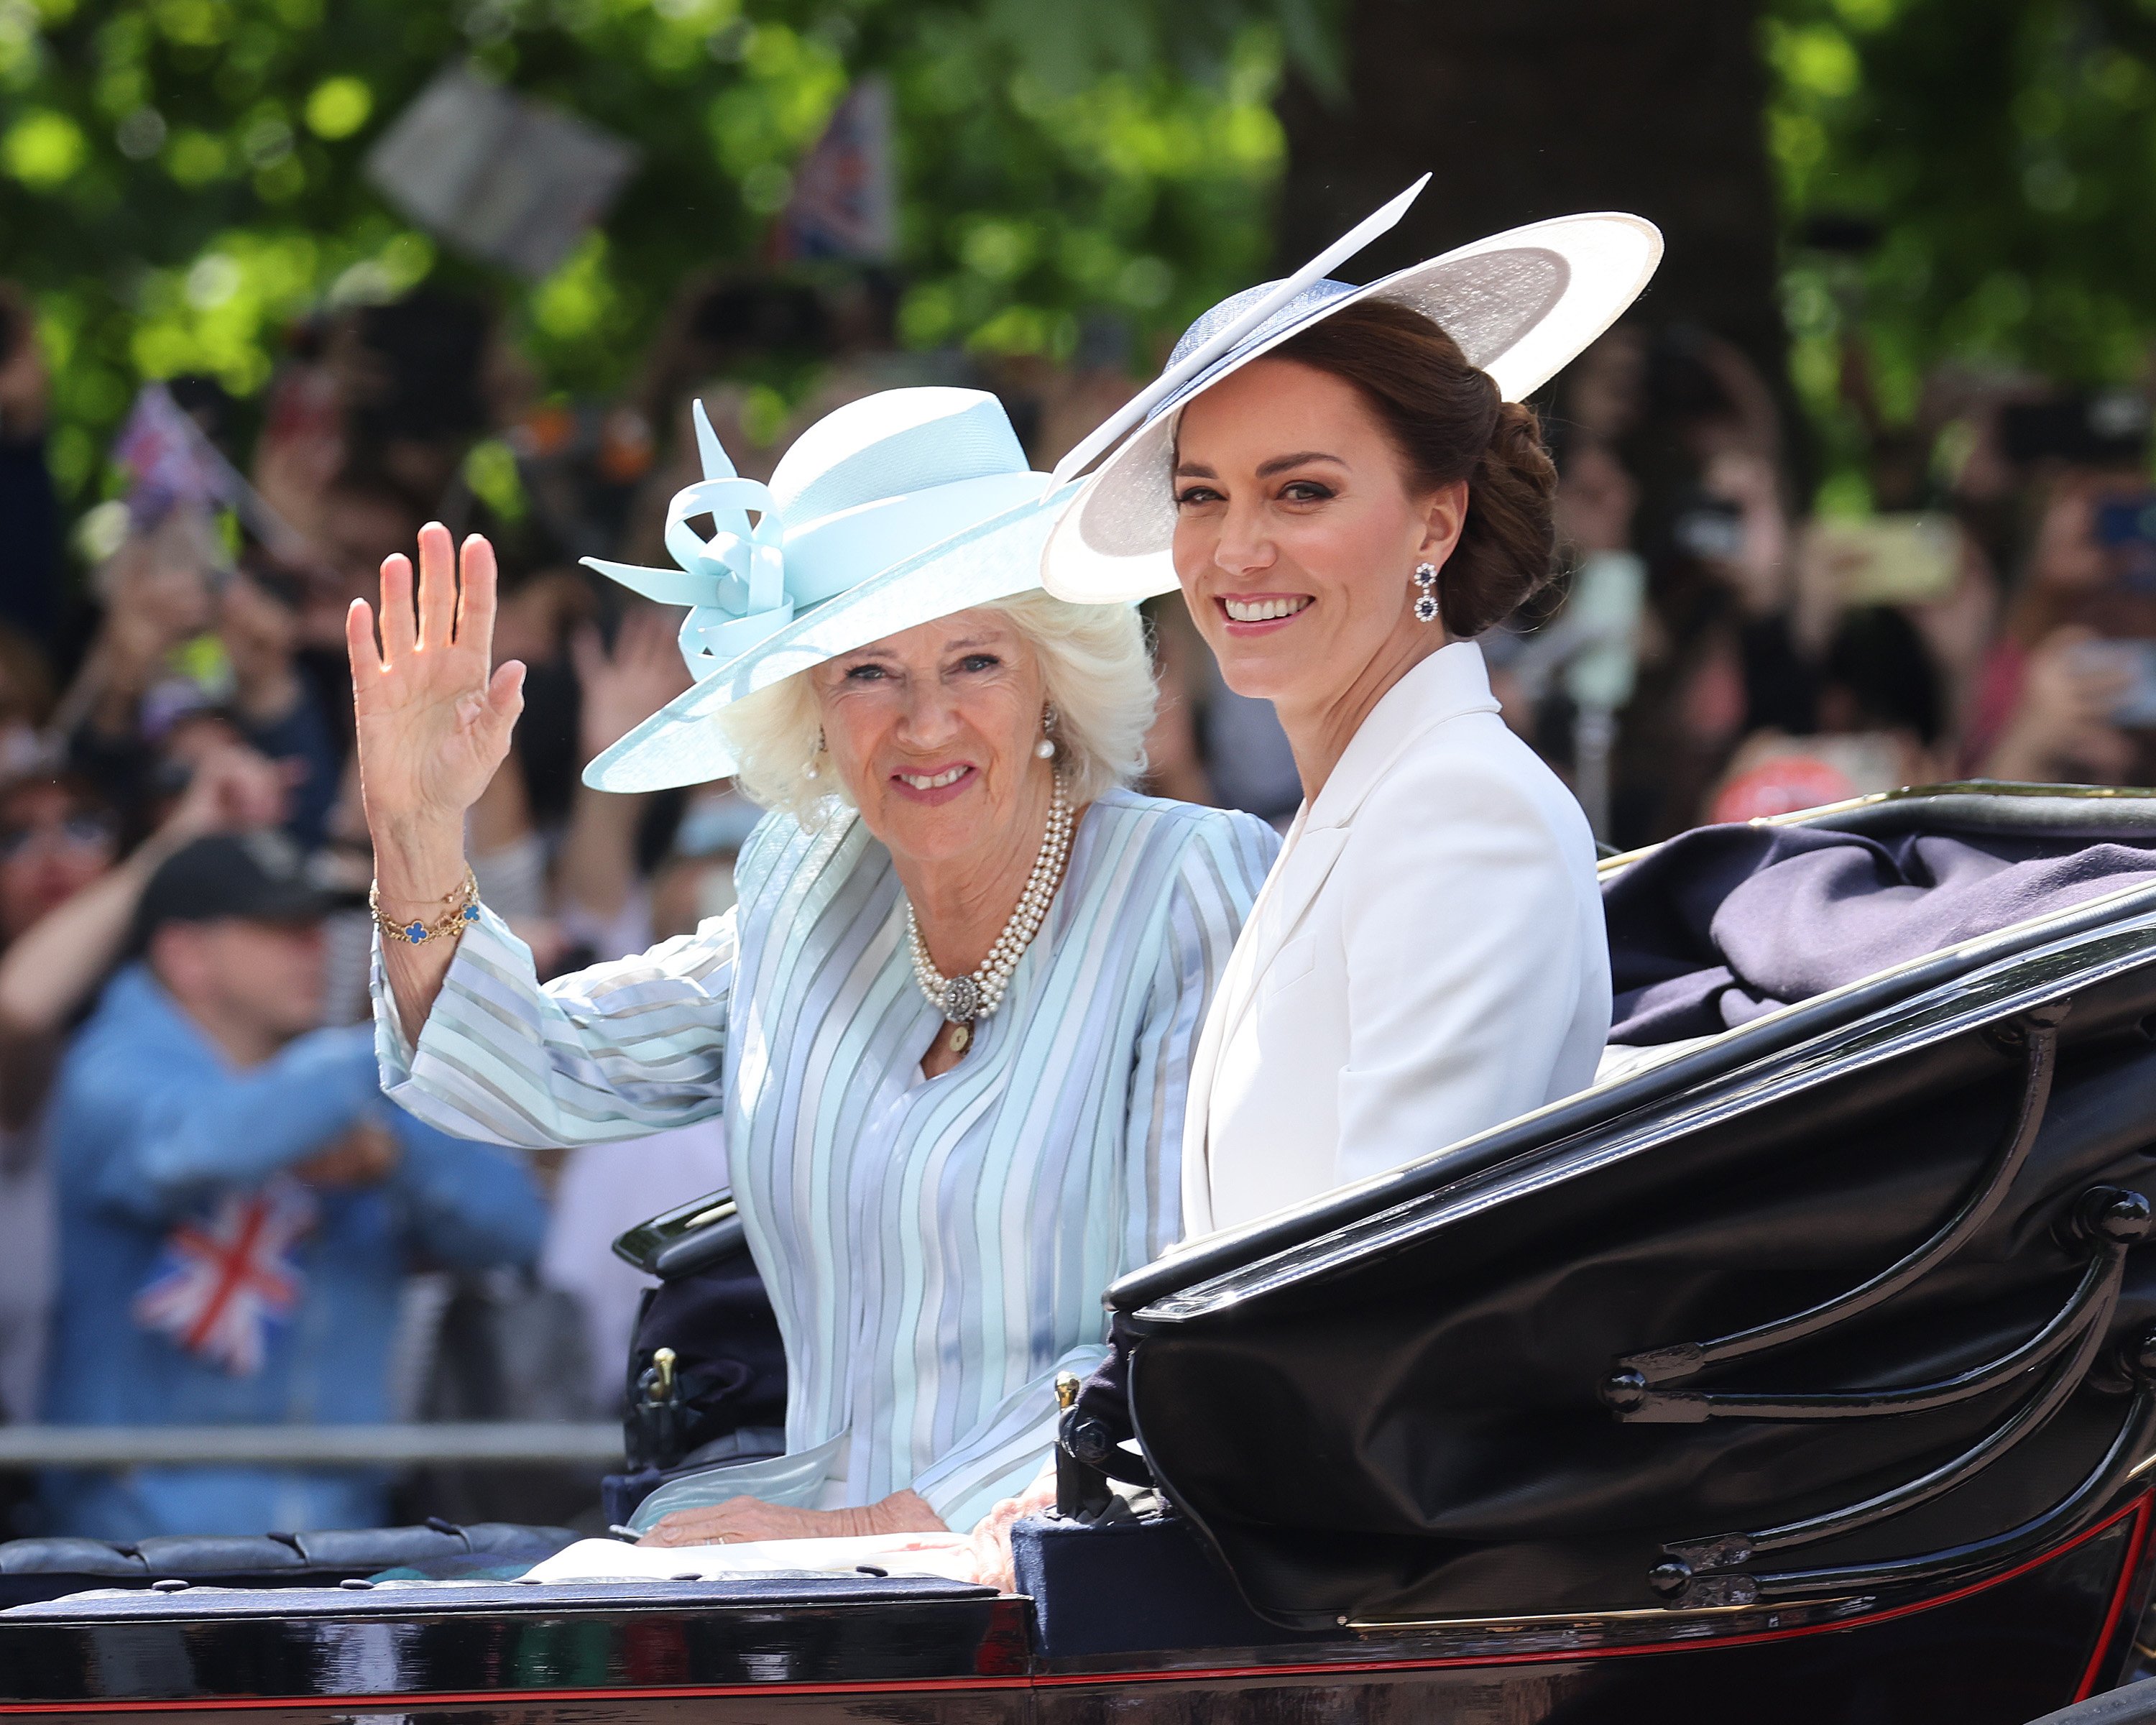 Camilla Parker Bowles waving and Kate Middleton smiling as they ride in a carriage during Trooping The Colour